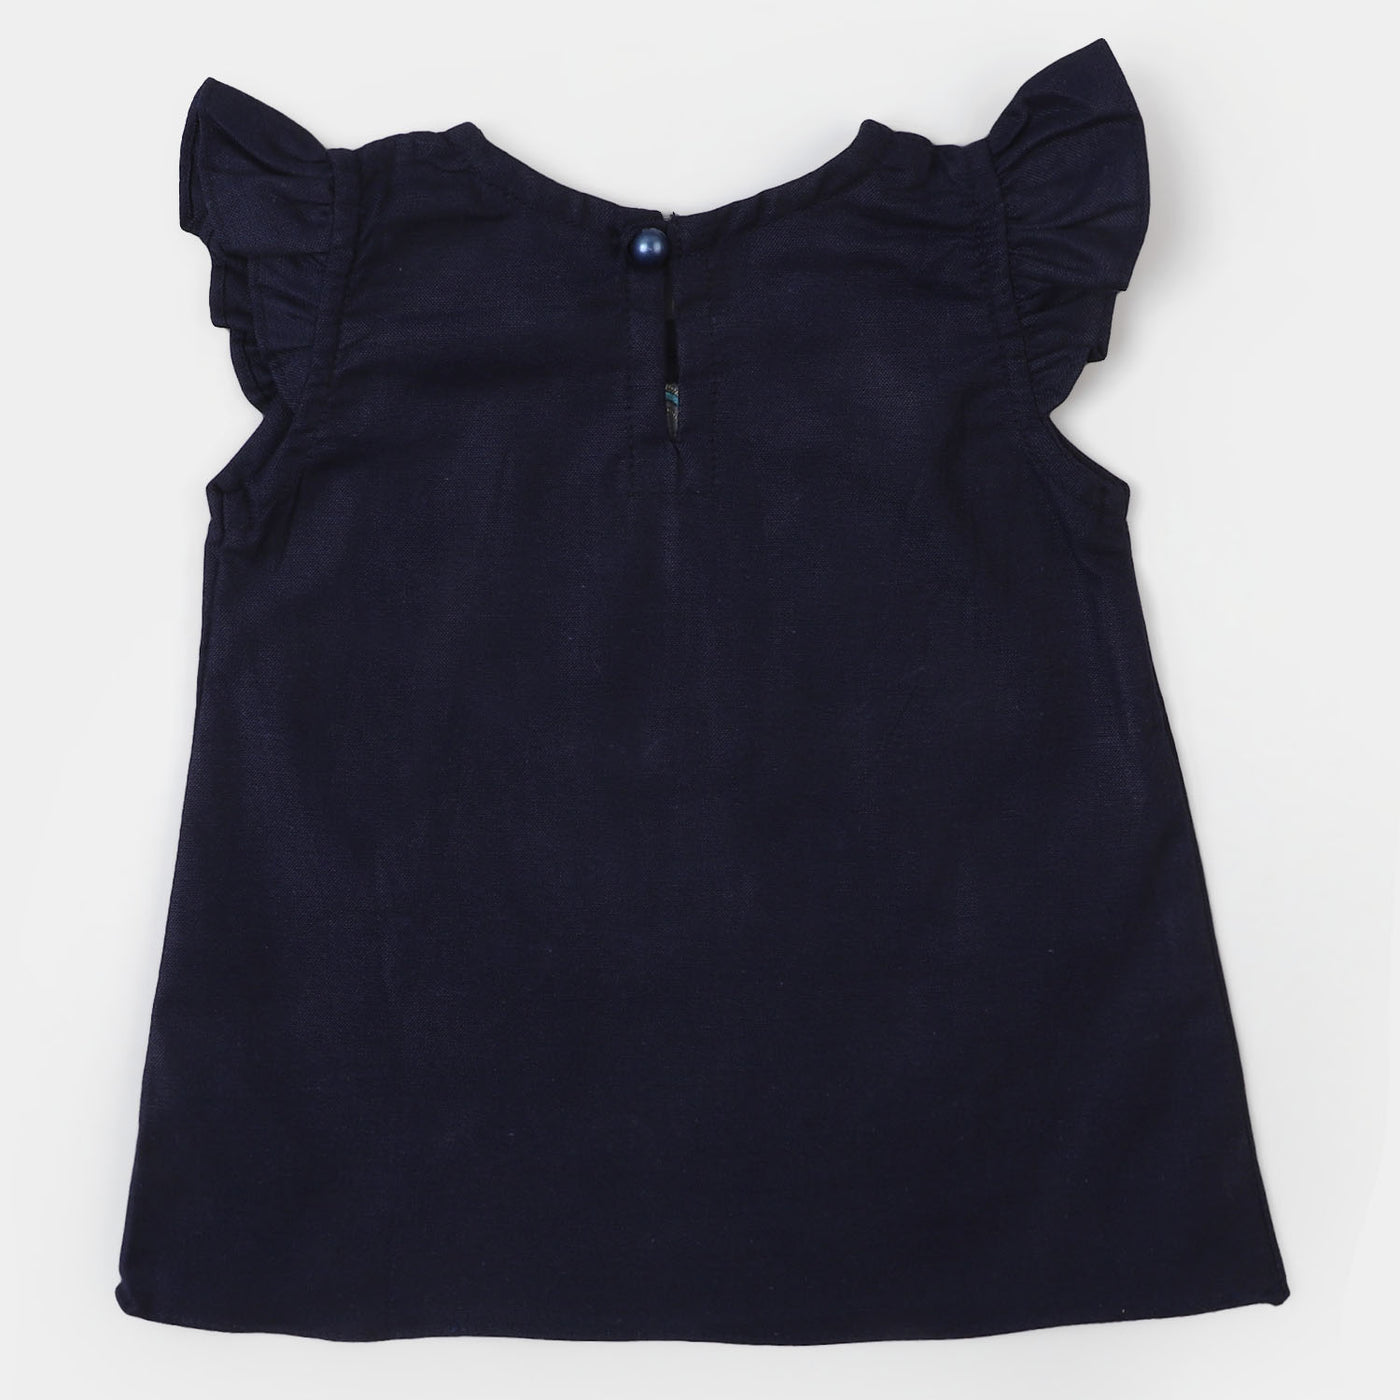 Infant Girls Cotton Embroidered Top Fishes - Navy